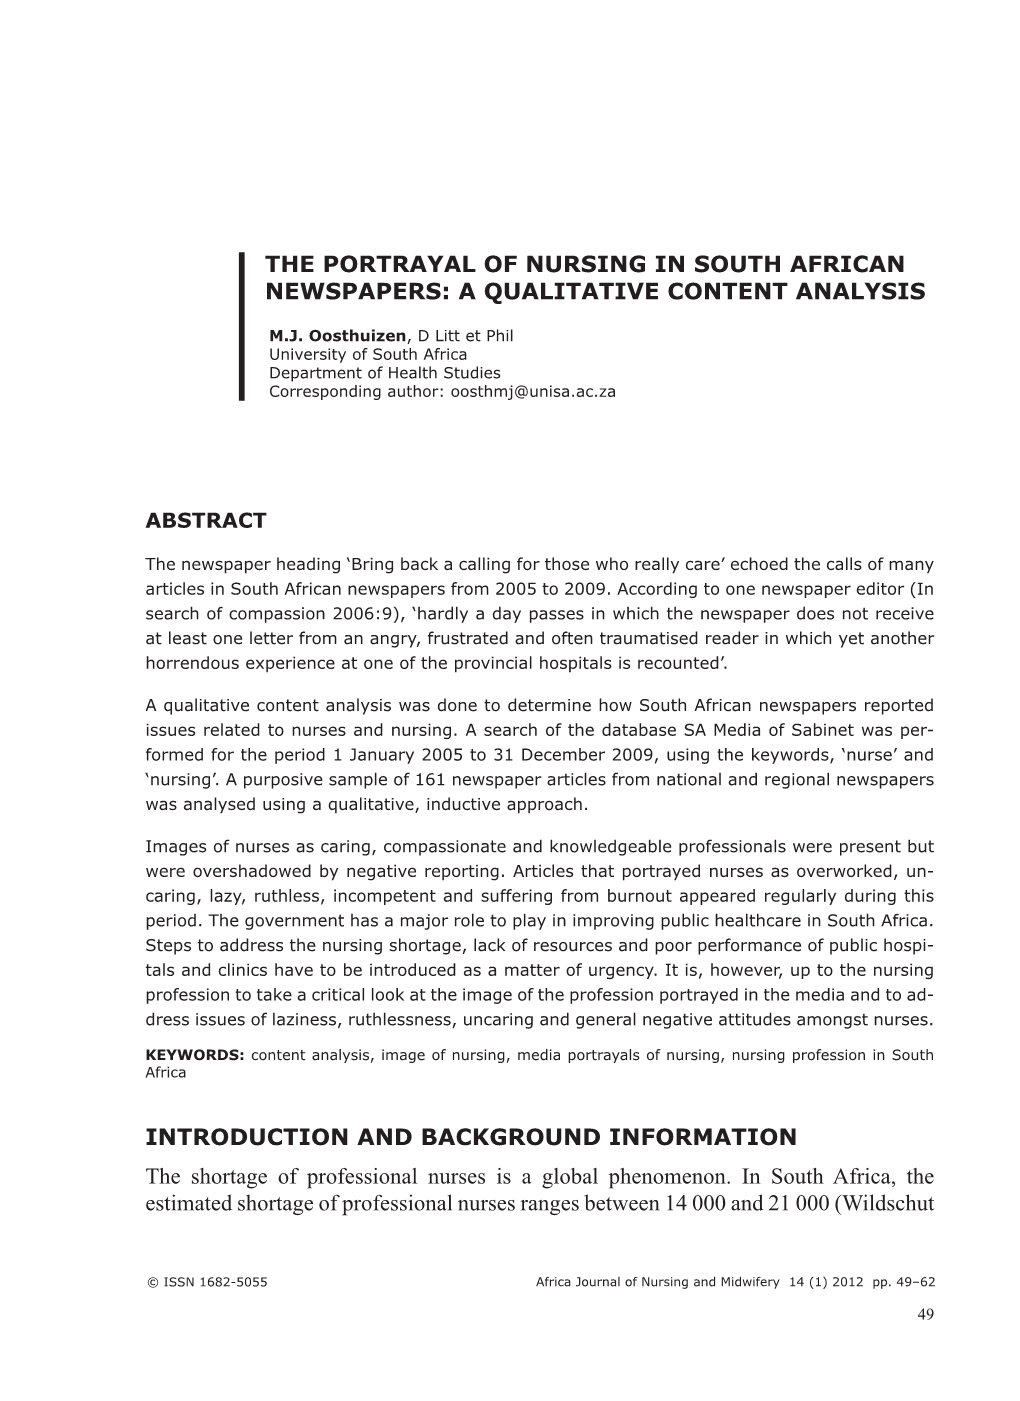 The Portrayal of Nursing in South African Newspapers: a Qualitative Content Analysis